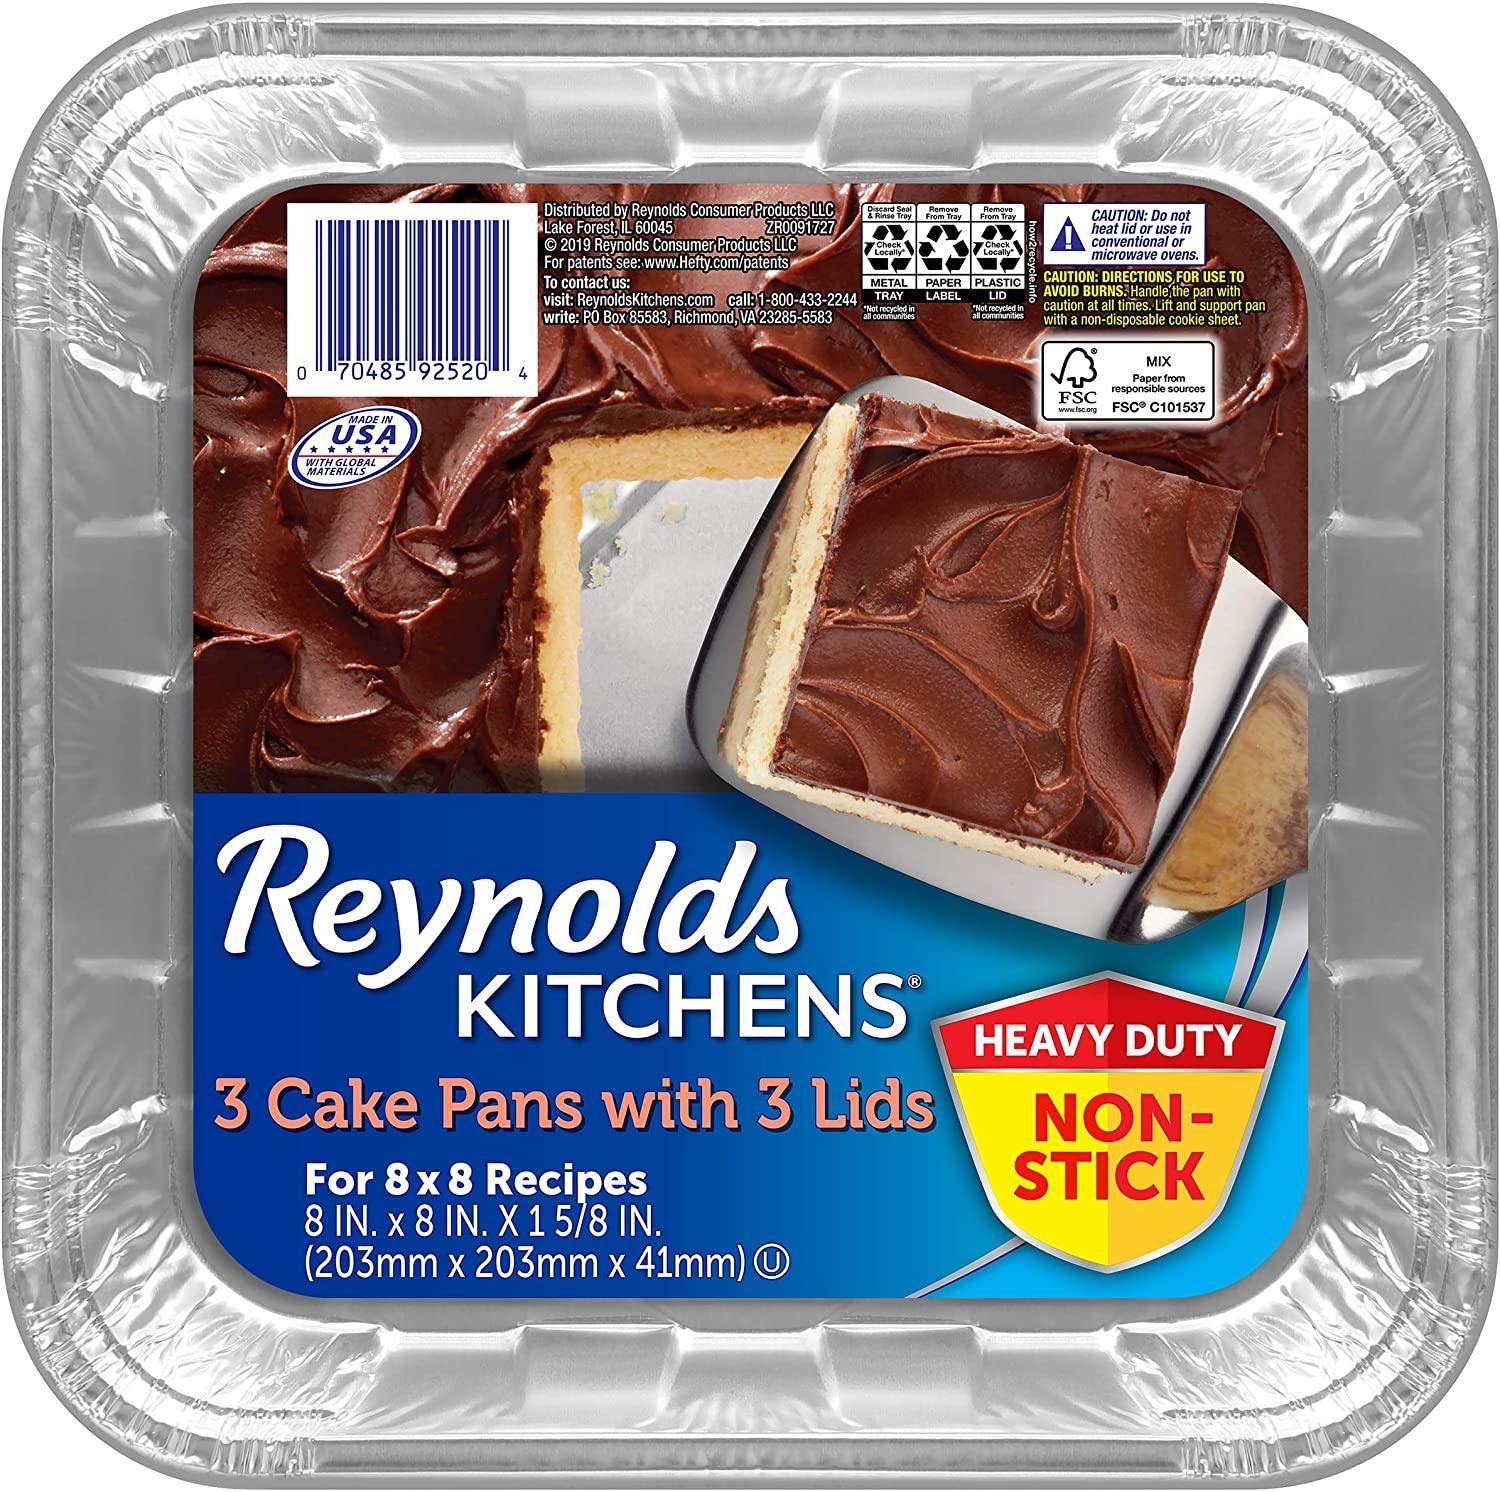 6 Reynolds Disposable Aluminum Cake Pans with Lids for $5.08 Shipped